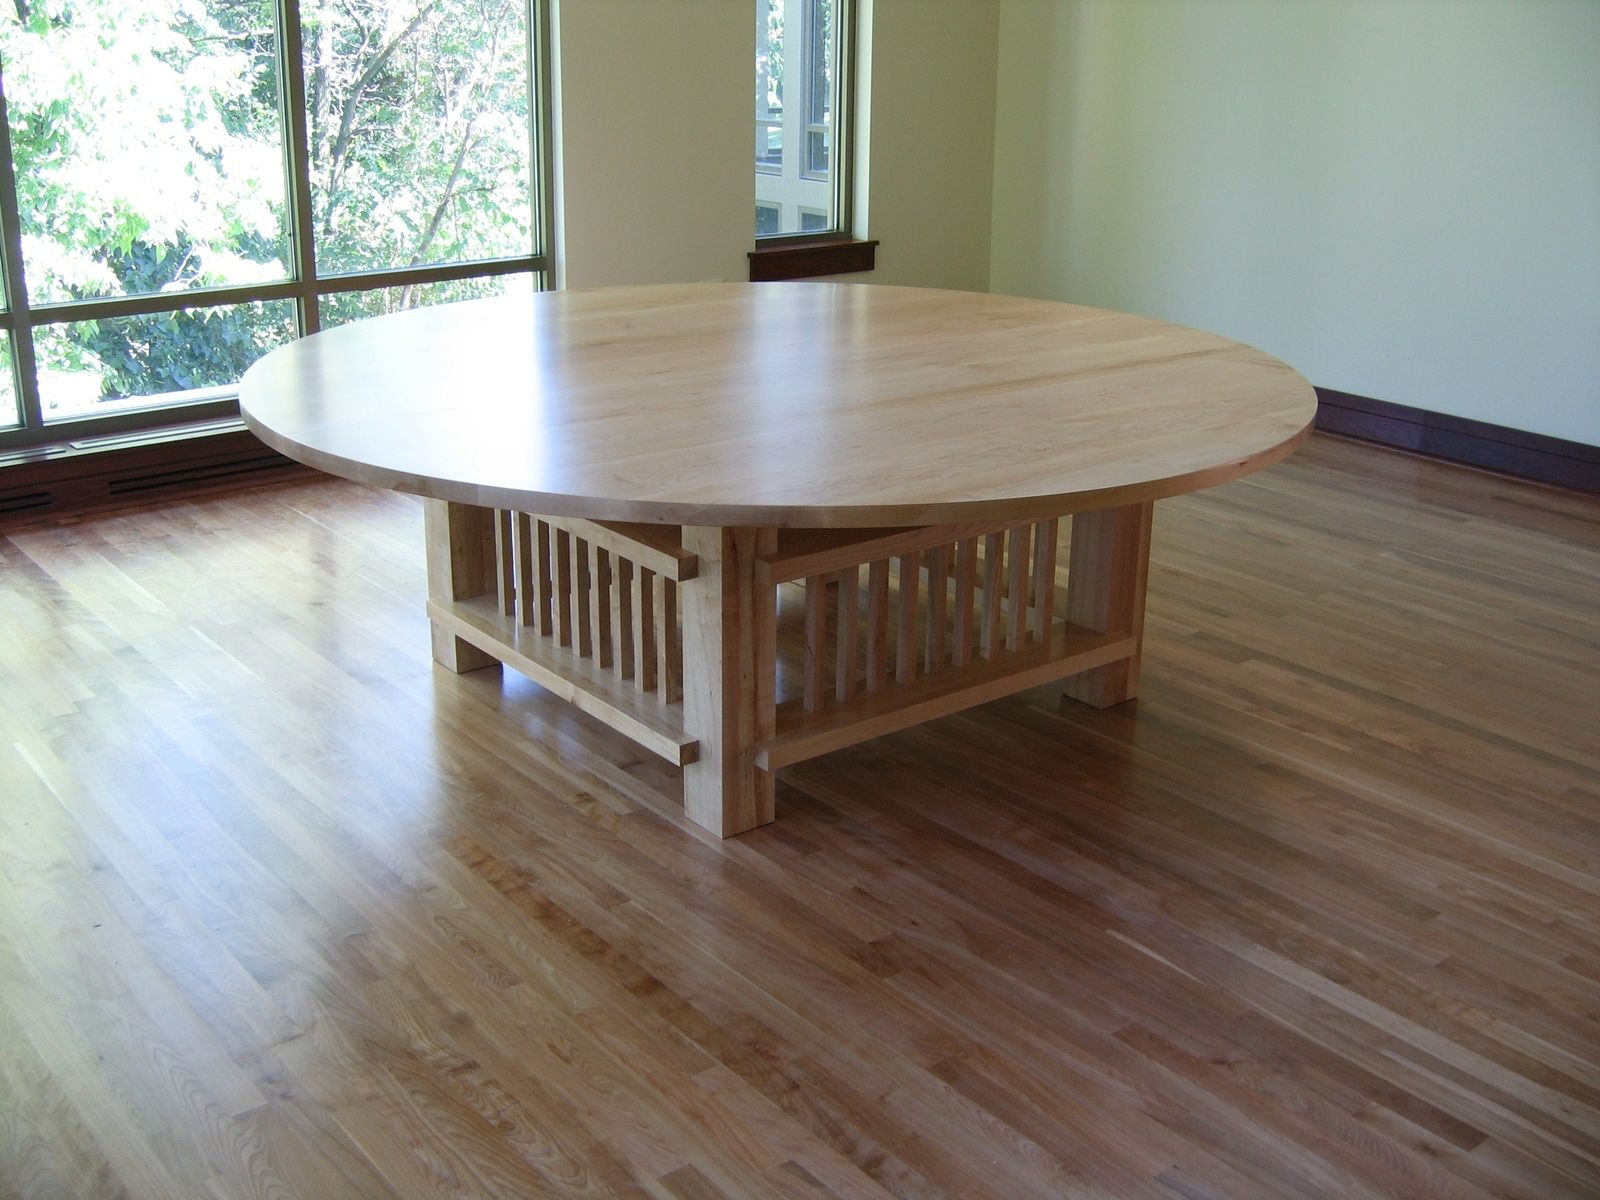 96 Inch Round Dining Room Tables